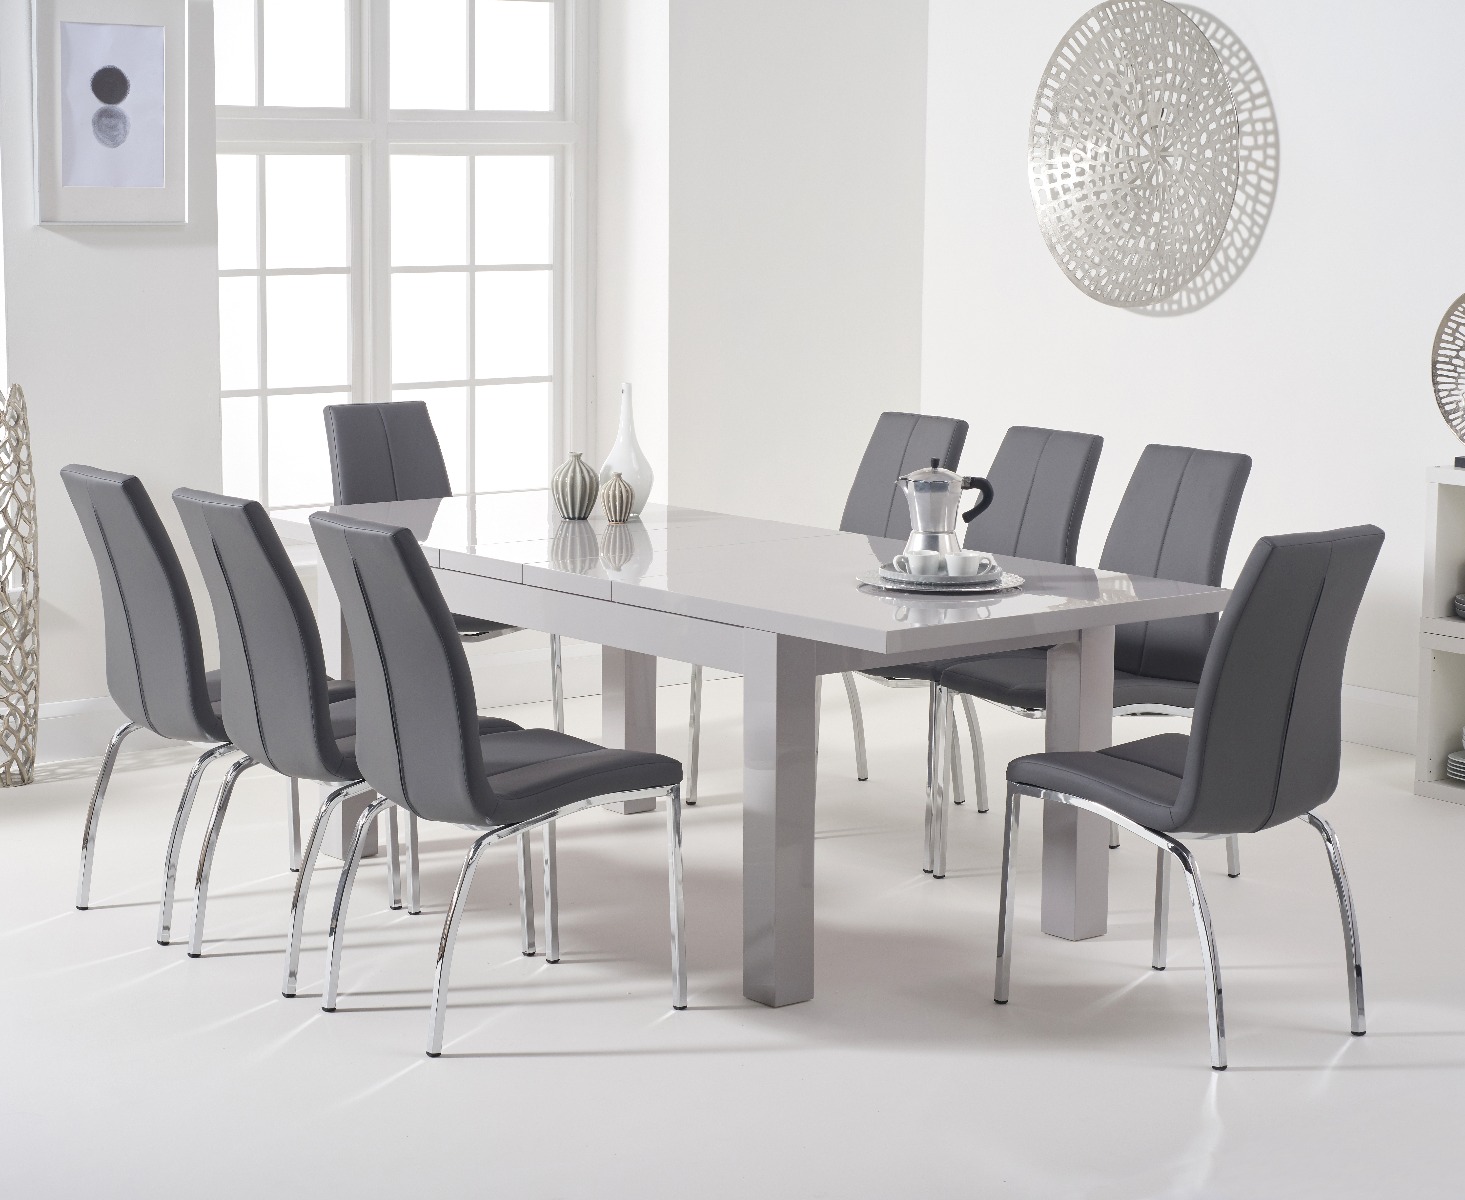 Atlanta Light Grey Gloss 160220cm Extending Dining Table With 4 Ivory White Cavello Chairs